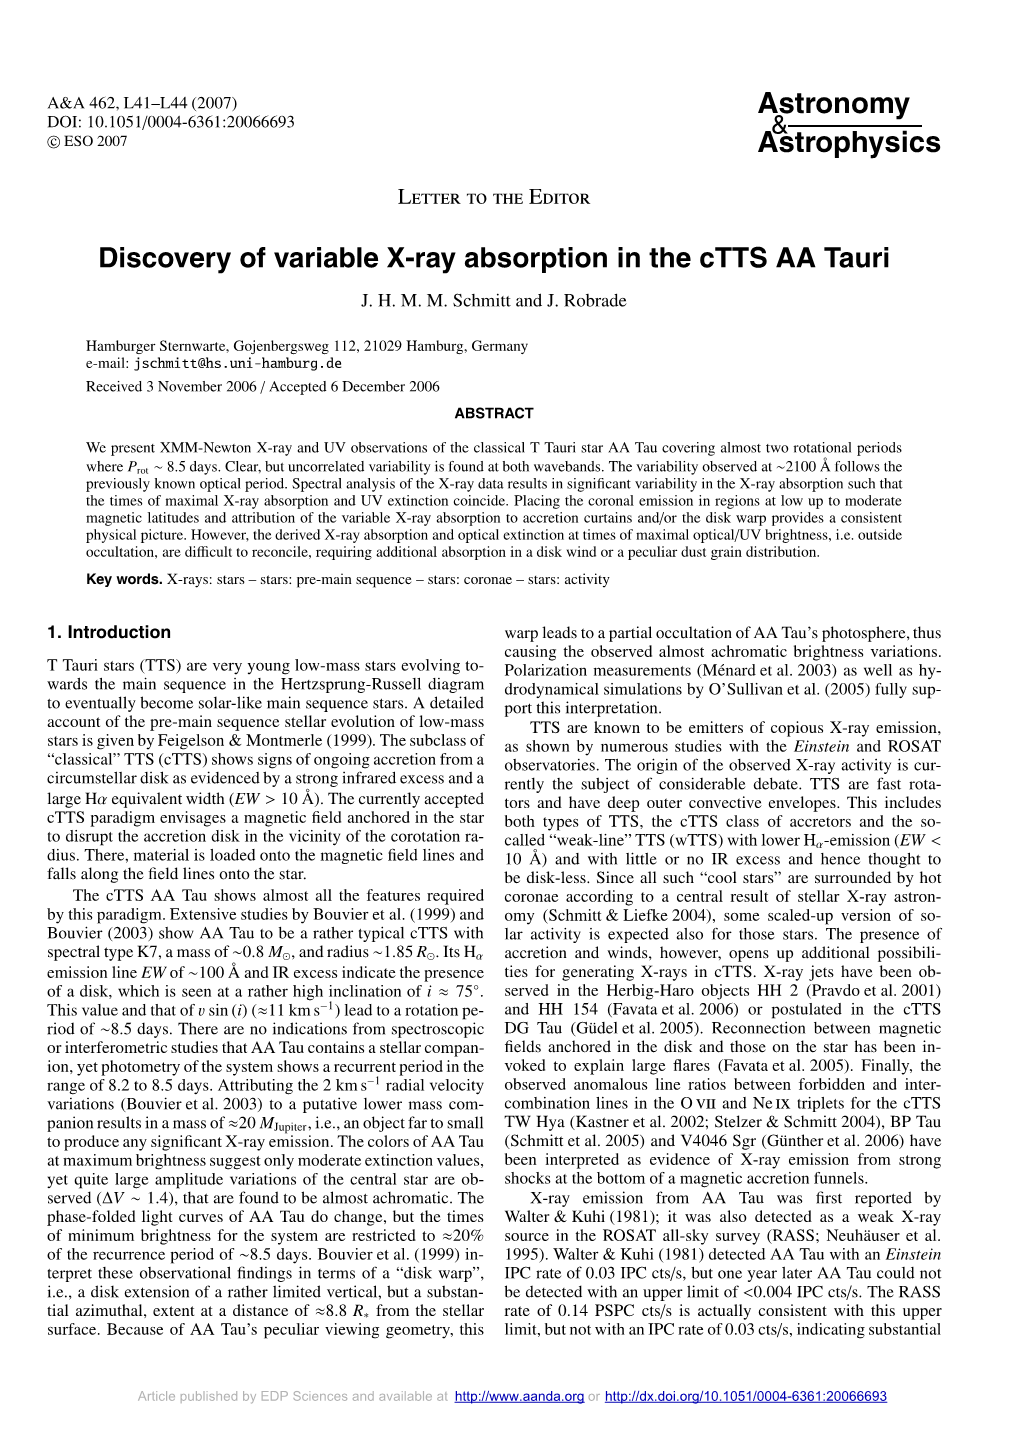 Discovery of Variable X-Ray Absorption in the Ctts AA Tauri J